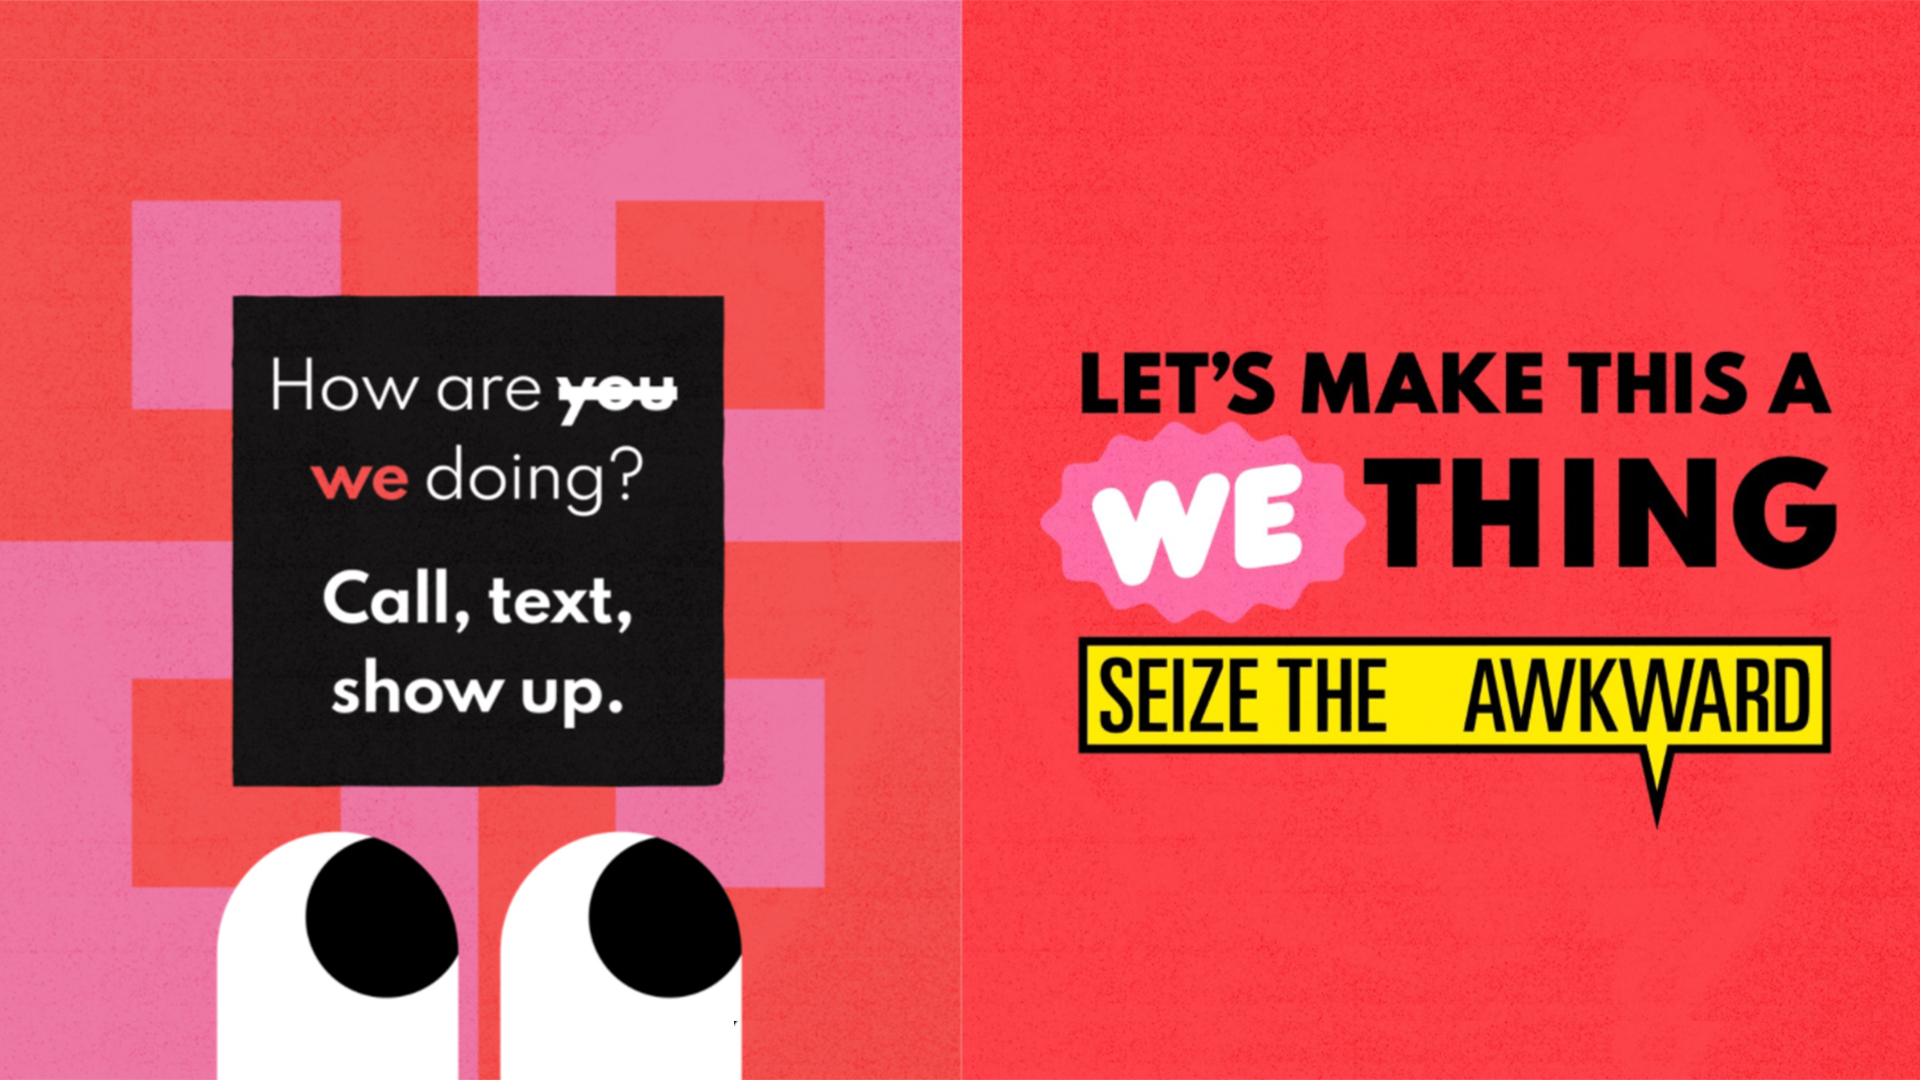 The Many Partners with Ad Council to Evolve 'Seize the Awkward' Campaign on Social Media